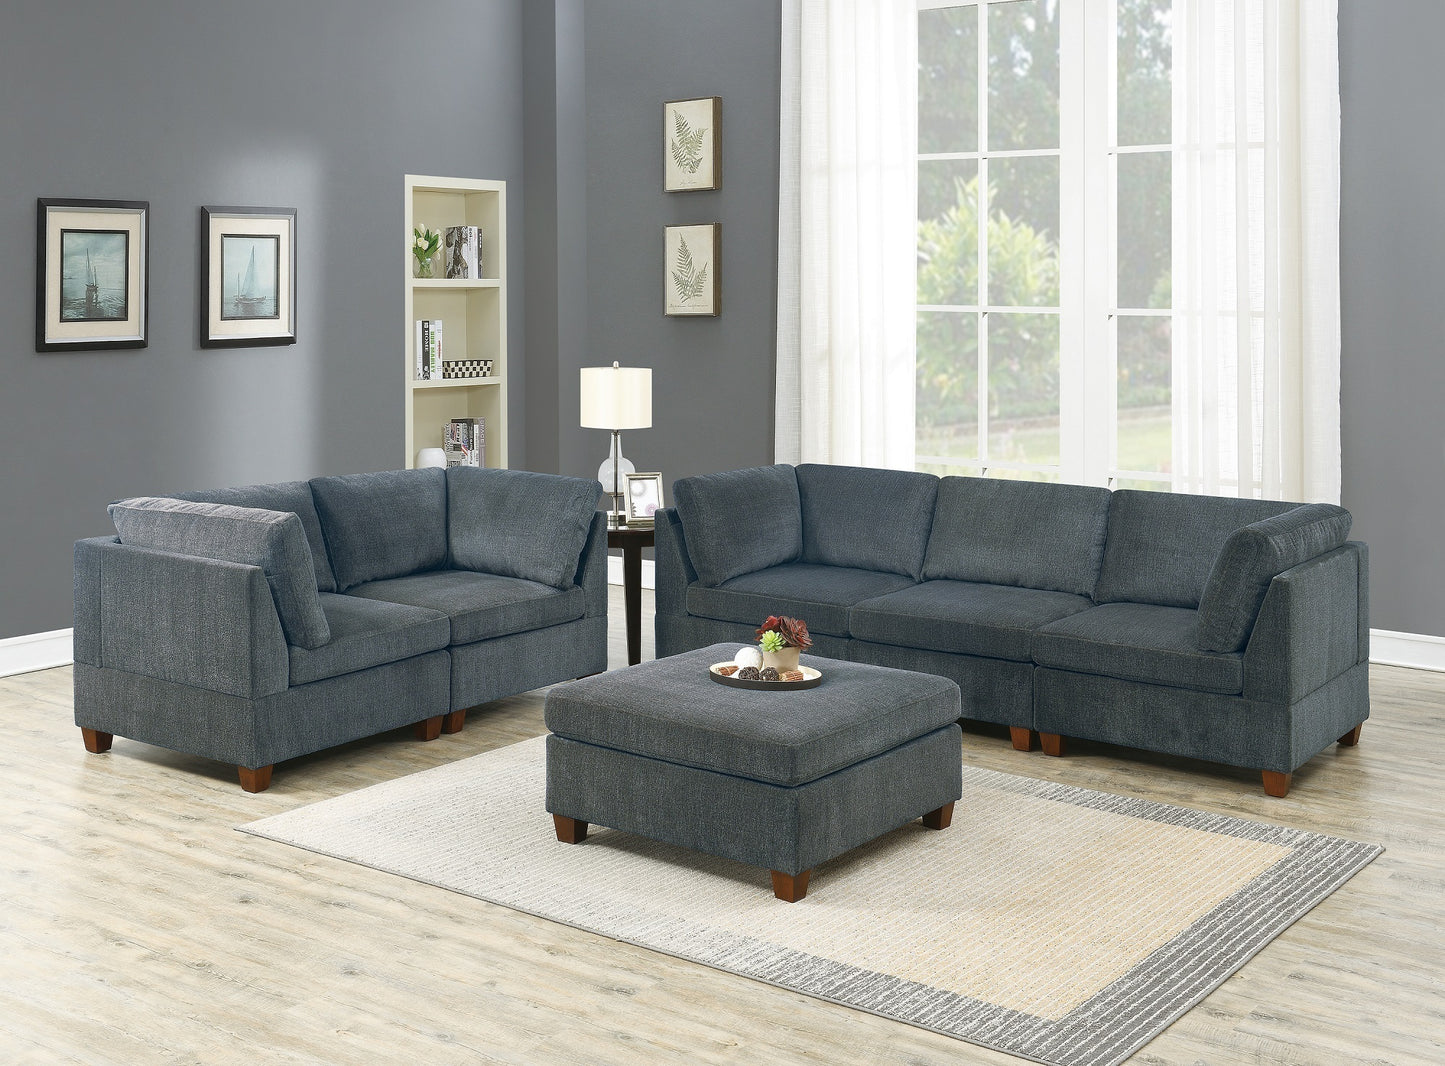 Living Room Furniture Grey Chenille Modular Sofa Set 6pc Set Sofa Loveseat Modern Couch 4x Corner Wedge 1x Armless Chairs and 1x Ottoman Plywood